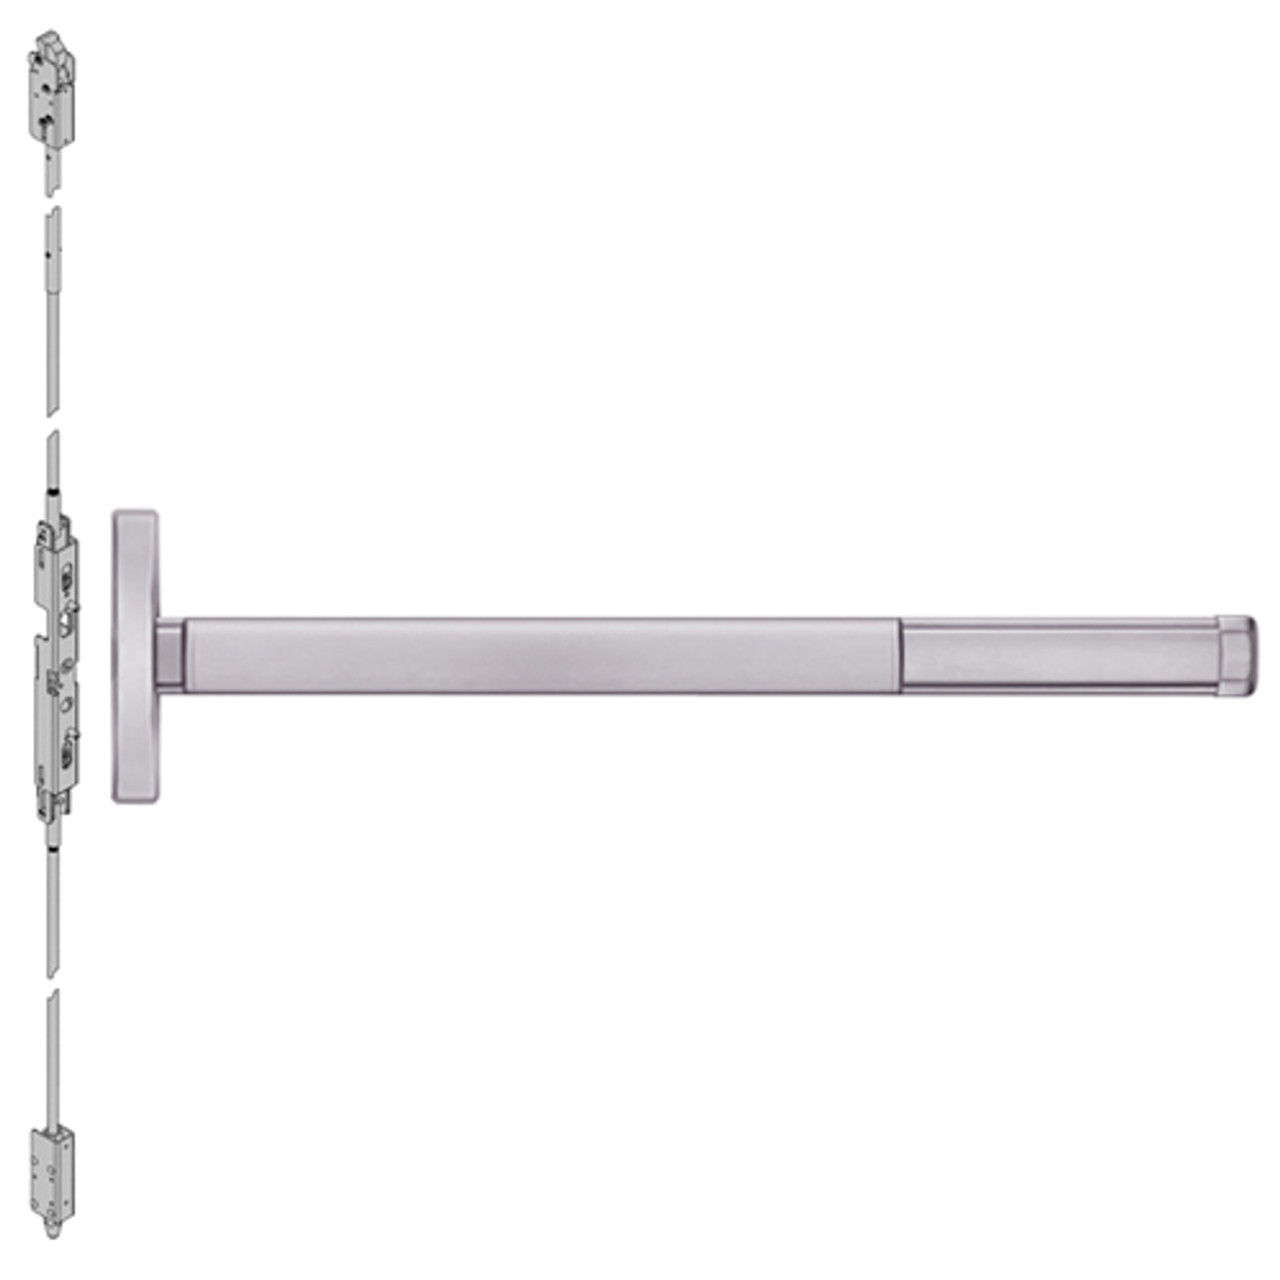 2608LBRCD-630-36 PHI 2600 Series Non Fire Rated Concealed Vertical Rod Exit Device Prepped for Key Controls Lever with Cylinder Dogging and LBR in Satin Stainless Steel Finish